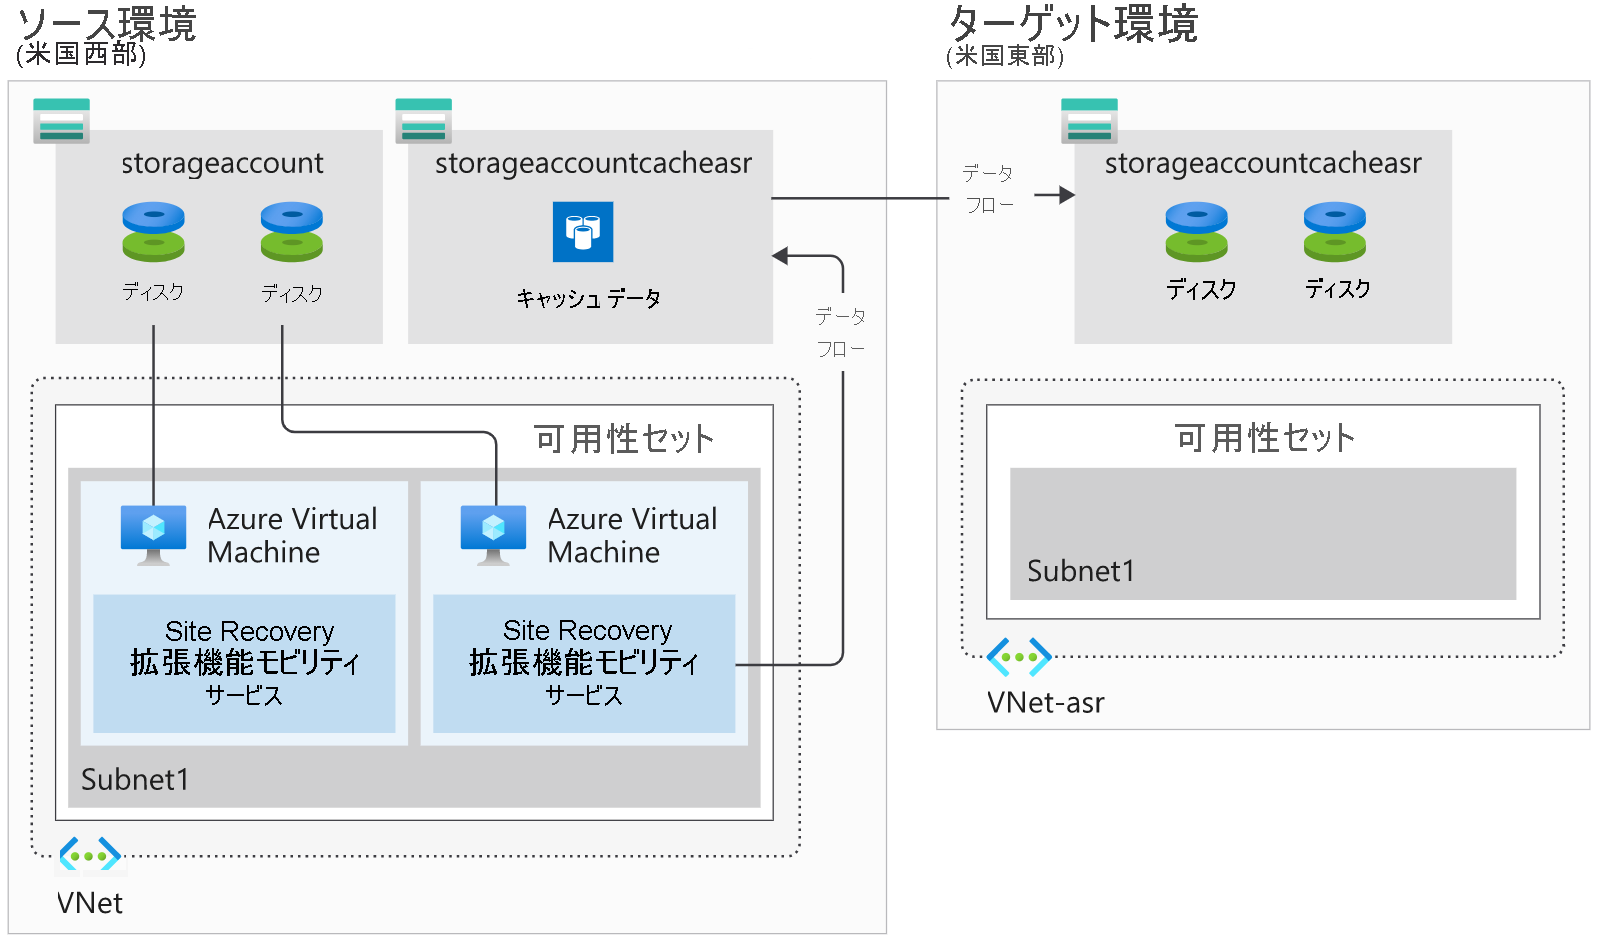 Diagram showing how Azure Site Recovery keeps an updated version of VM disks to enable replication from a source region to a target region.